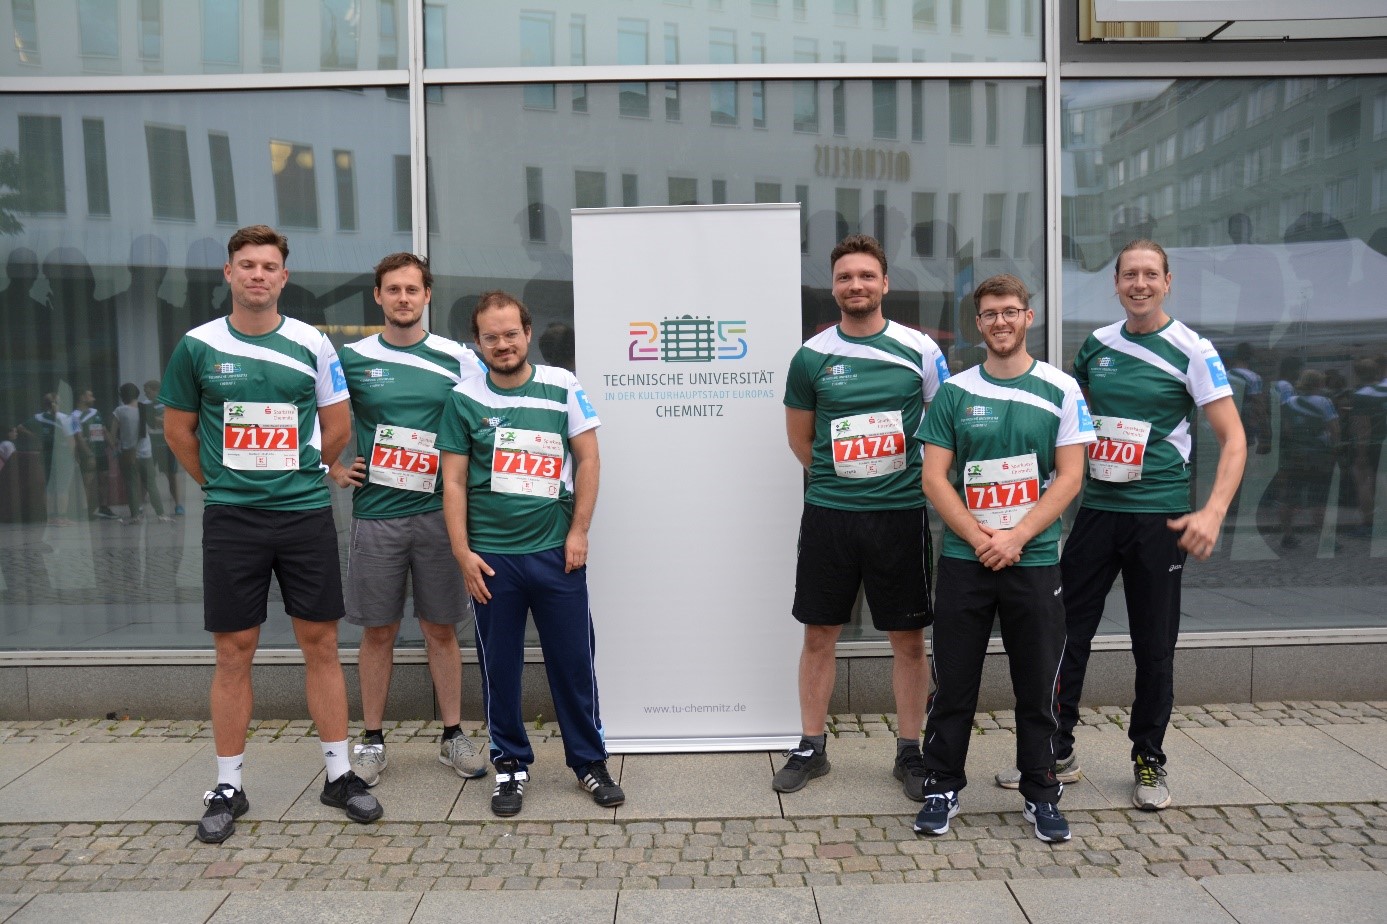 Participation of IKAT in the Chemnitz company run 2022